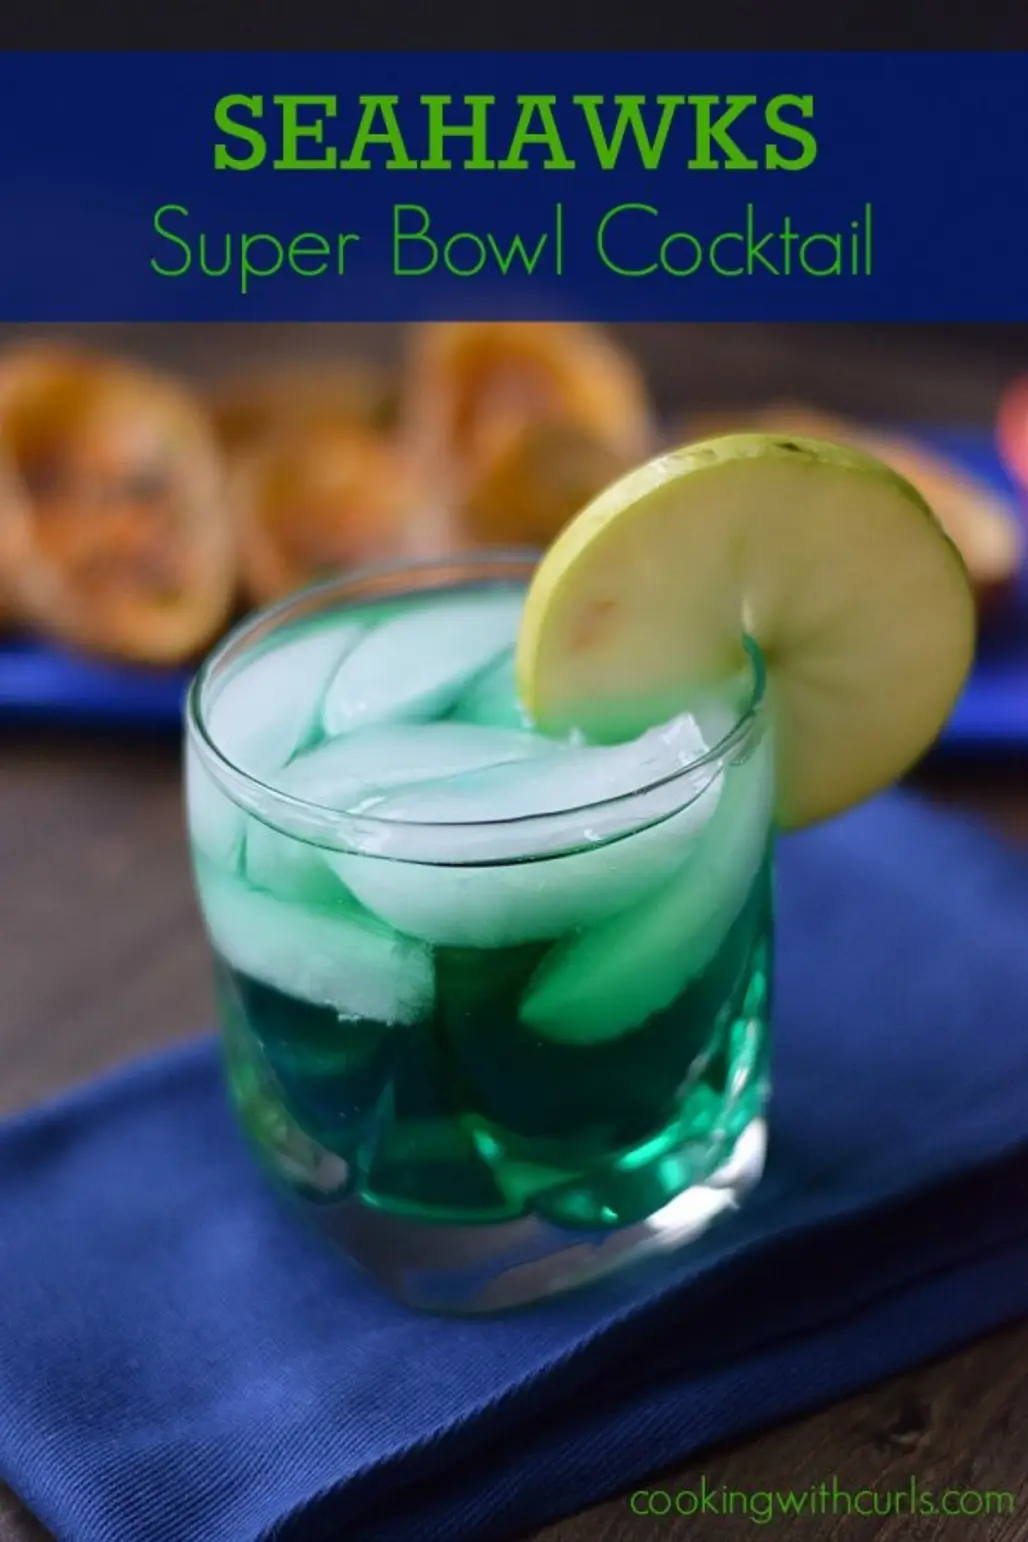 The “Seahawk’s” Cocktail